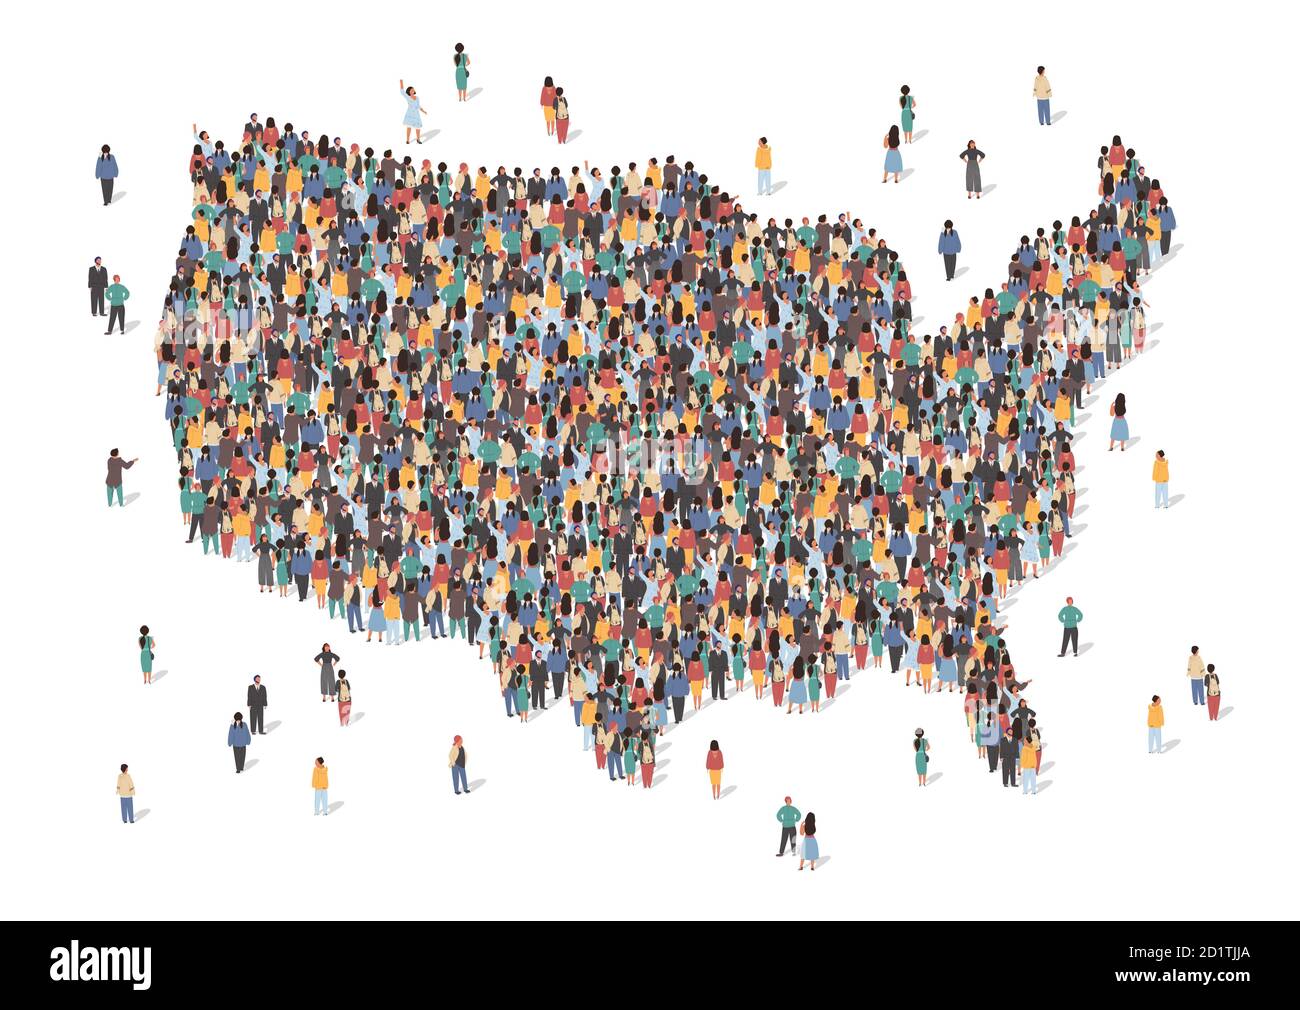 USA map made of many people, large crowd shape. Group of people stay in us country map formation. Immigration, election, multicultural diversity Stock Vector